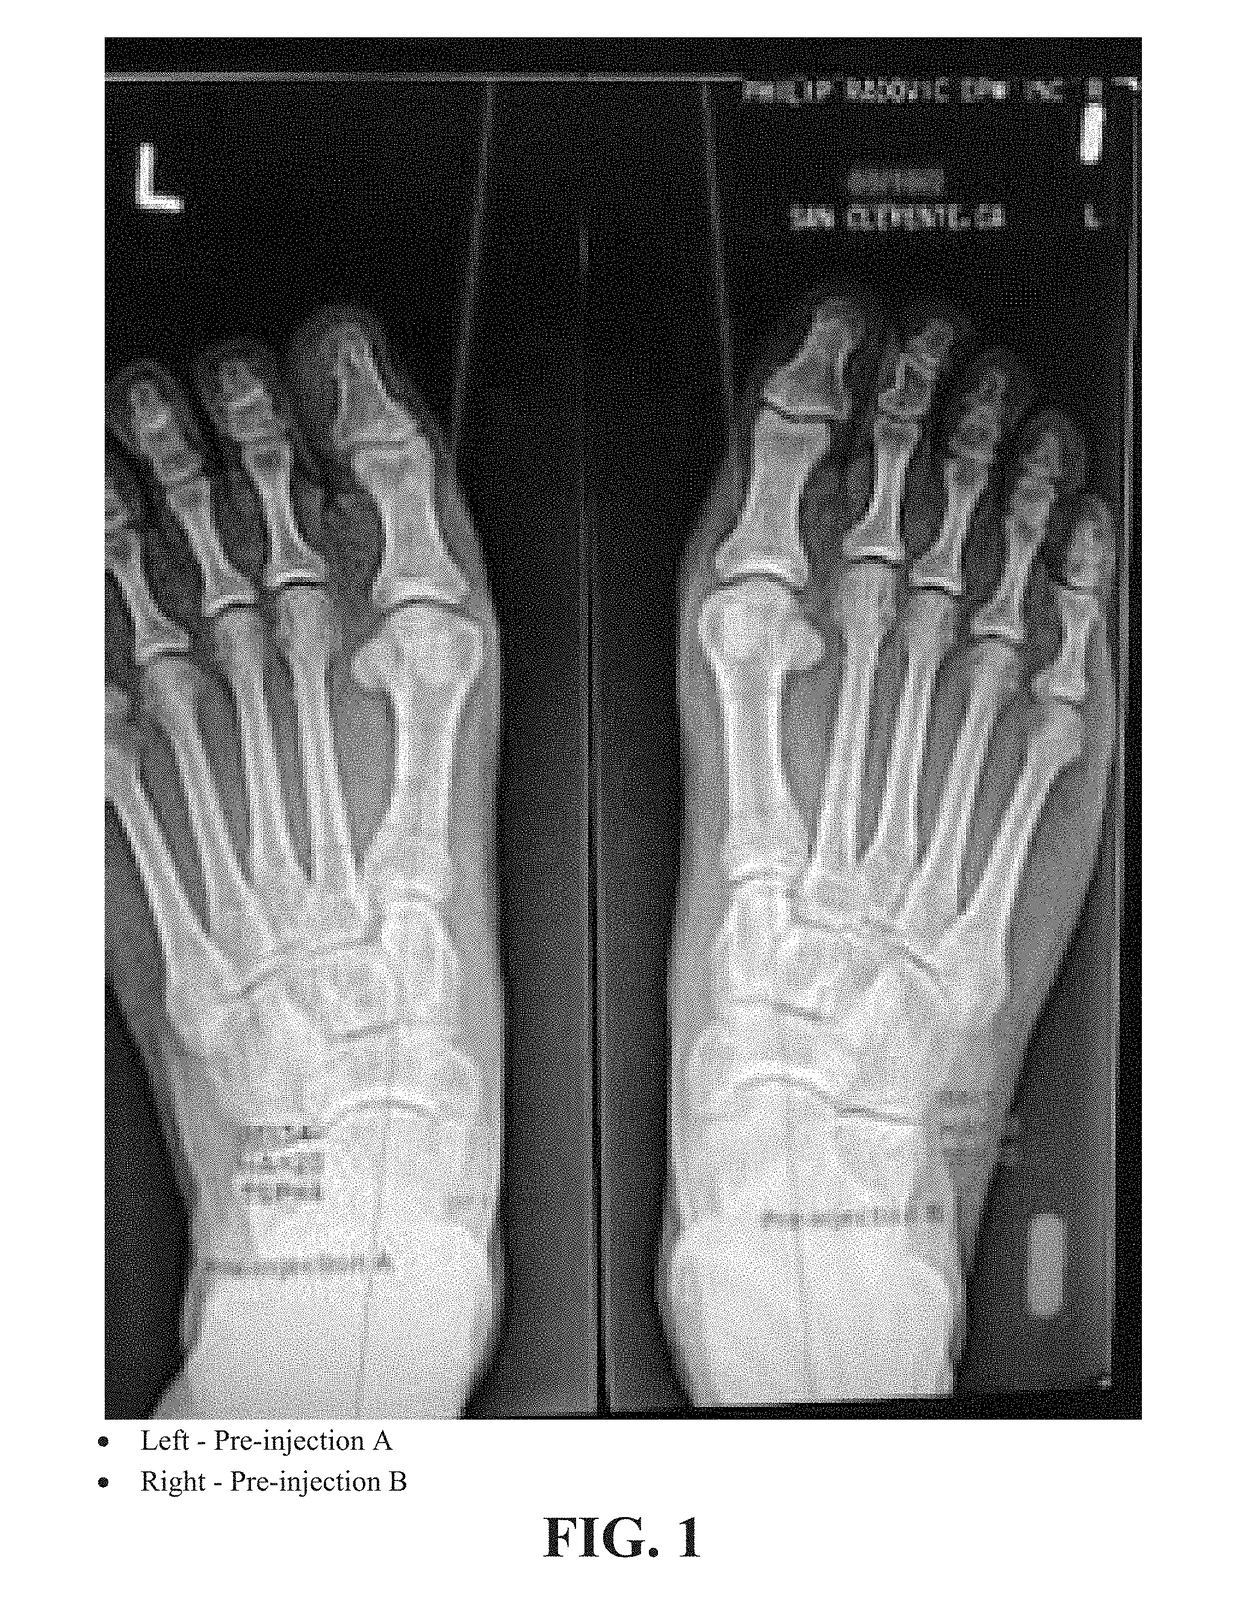 Methods of treating abnormalities of the first metatarsophalangeal joint of the foot